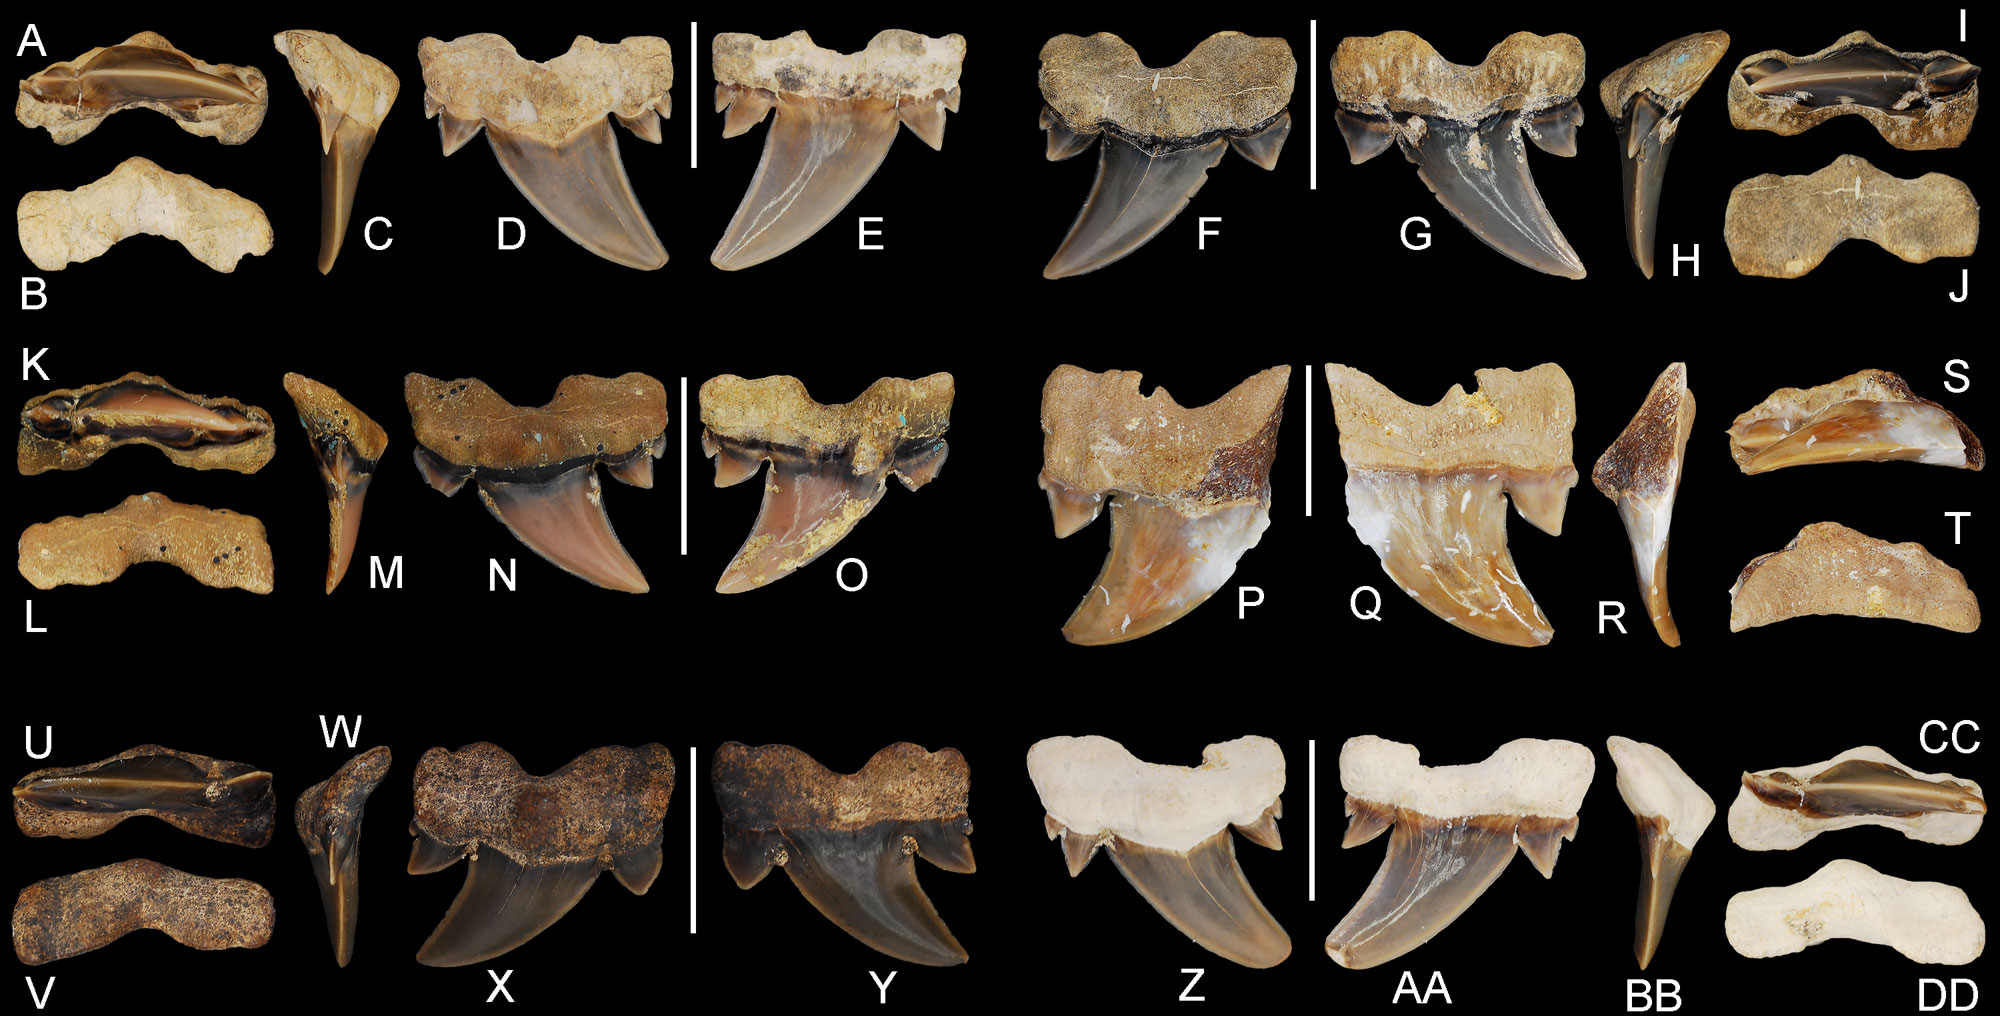 Photographic plate showing 12 fossil shark's teeth in different views. The teeth are on a black background.